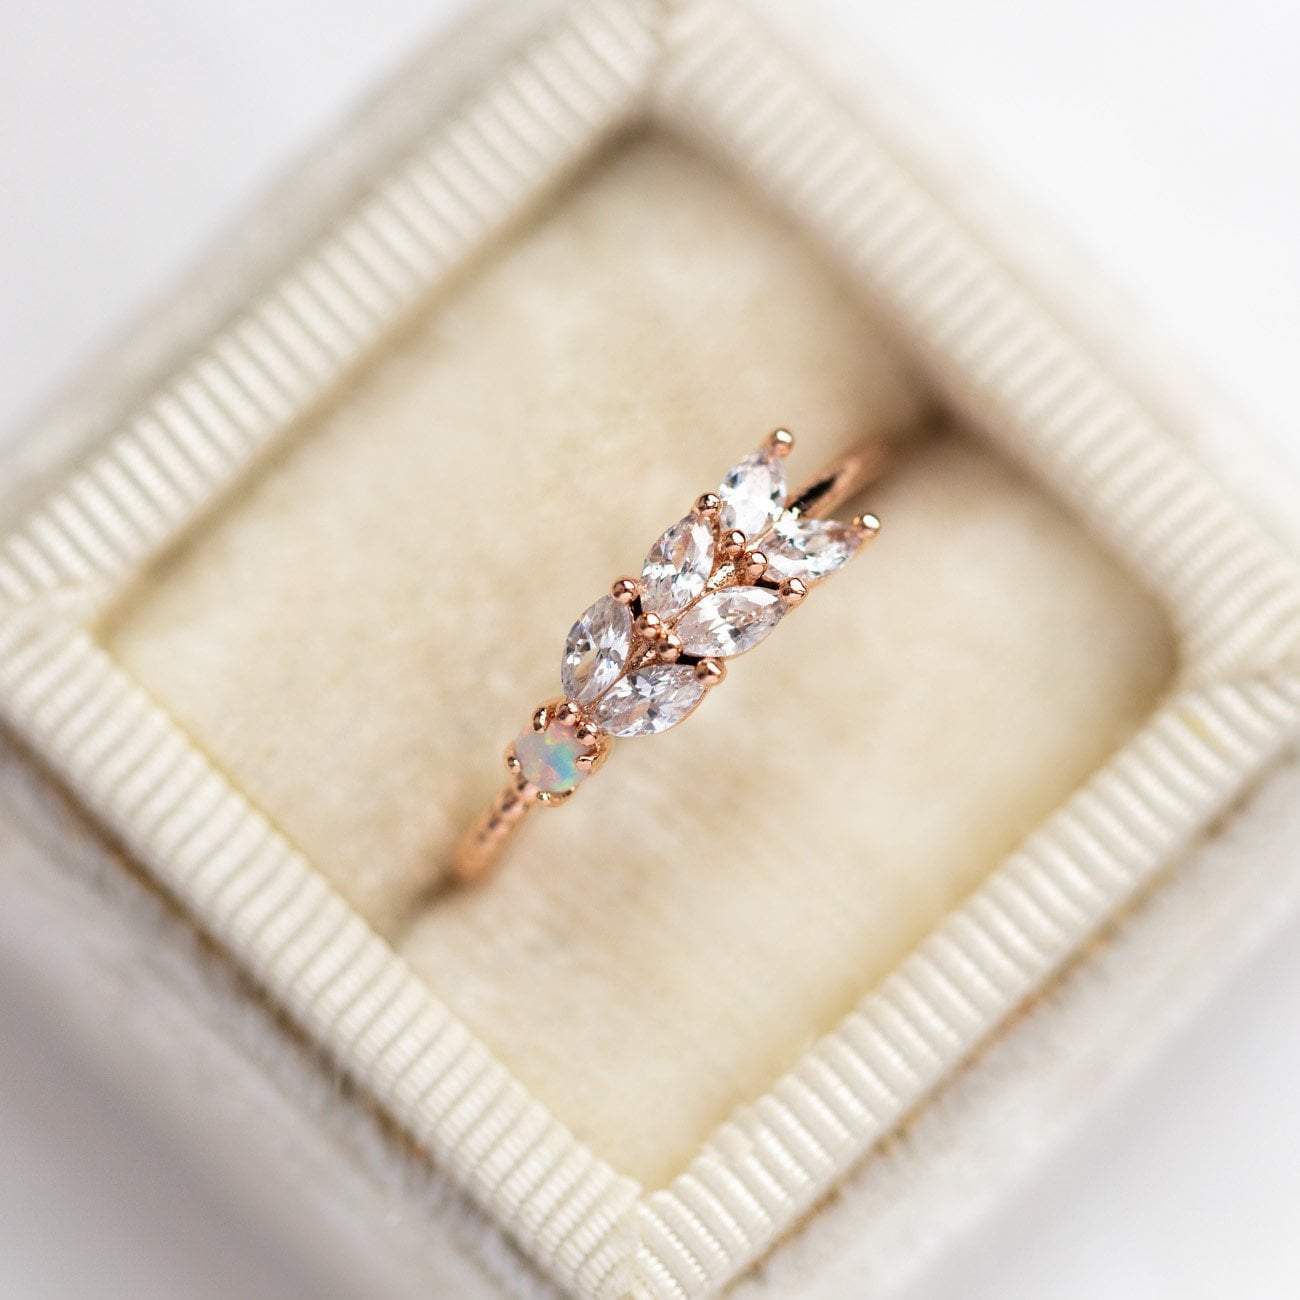 Local Eclectic Dainty Rose Gold Opal Ring with Cubic Zirconia